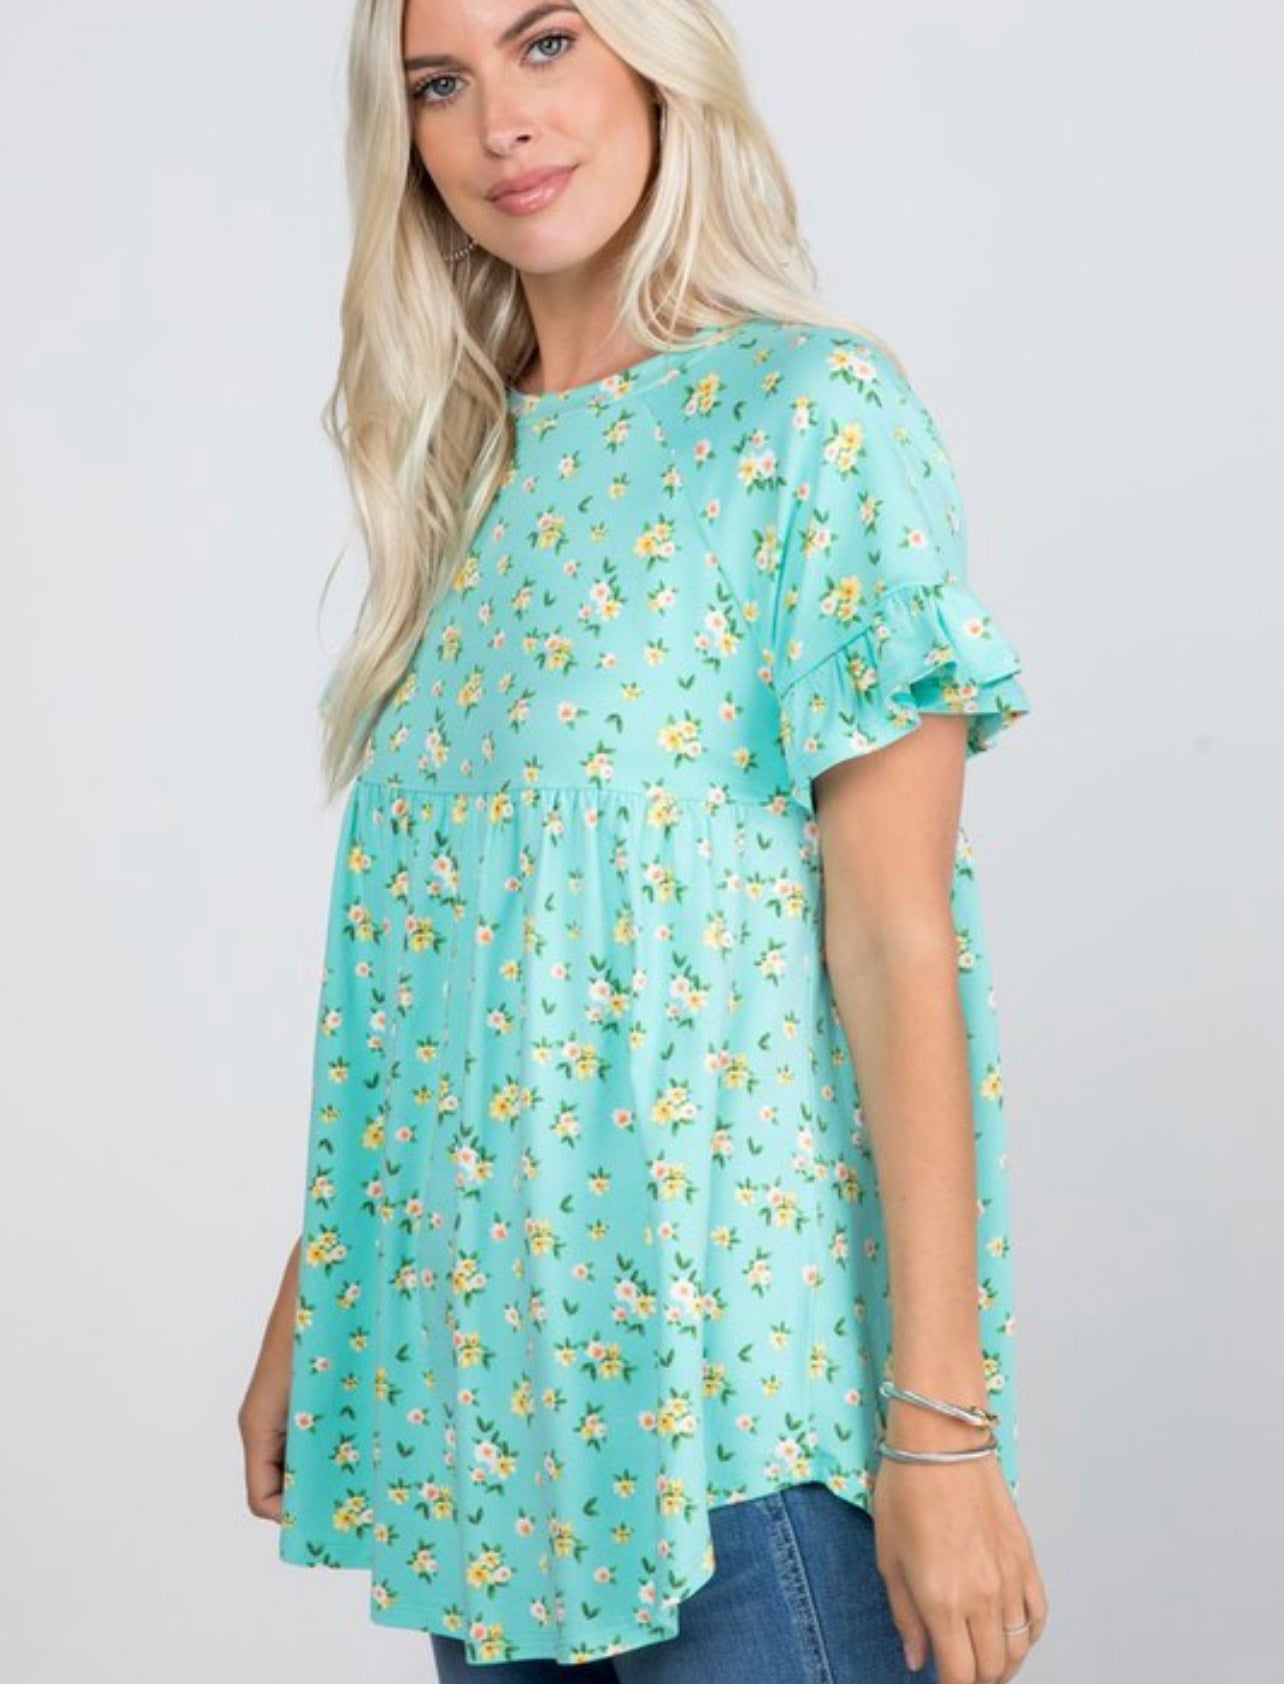 Product details Floral Printed  Ruffled sleeves Round neckline Baby doll style straight hem at bottom Fits true to size  *Colors may vary slightly due to monitor resolution and lighting* Southern Bliss Boutique 